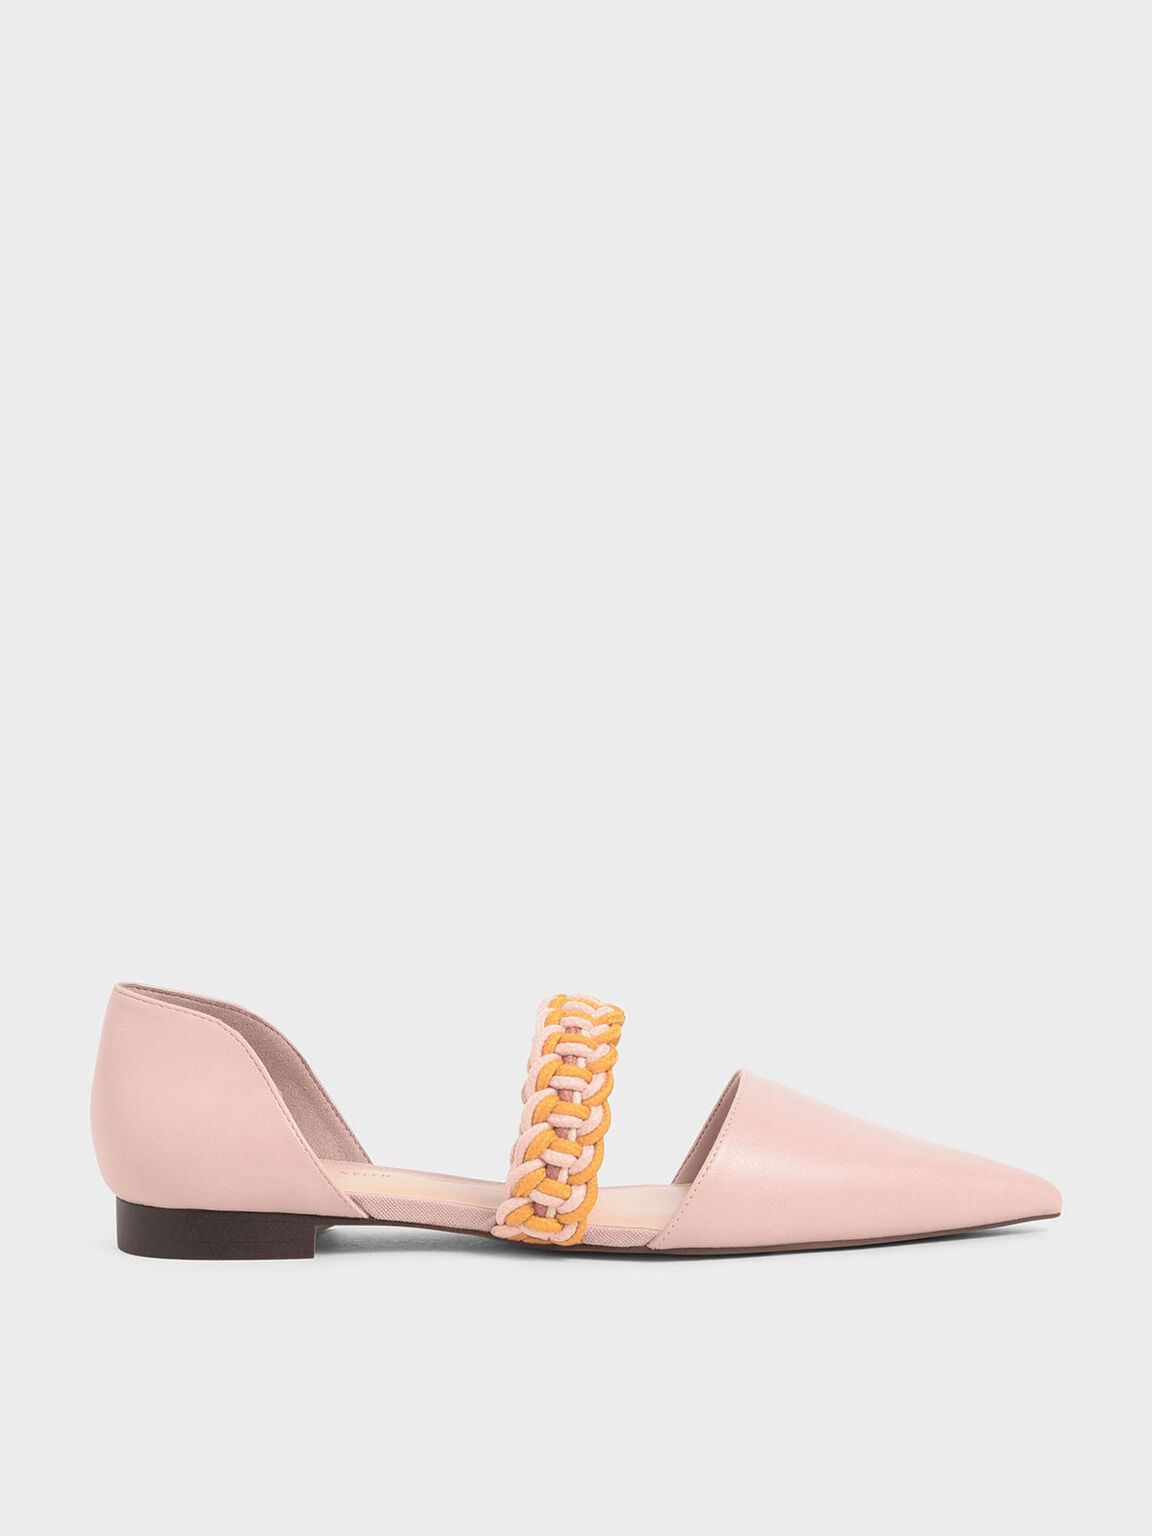 Braided-Strap Mary Jane Flats, Nude, hi-res